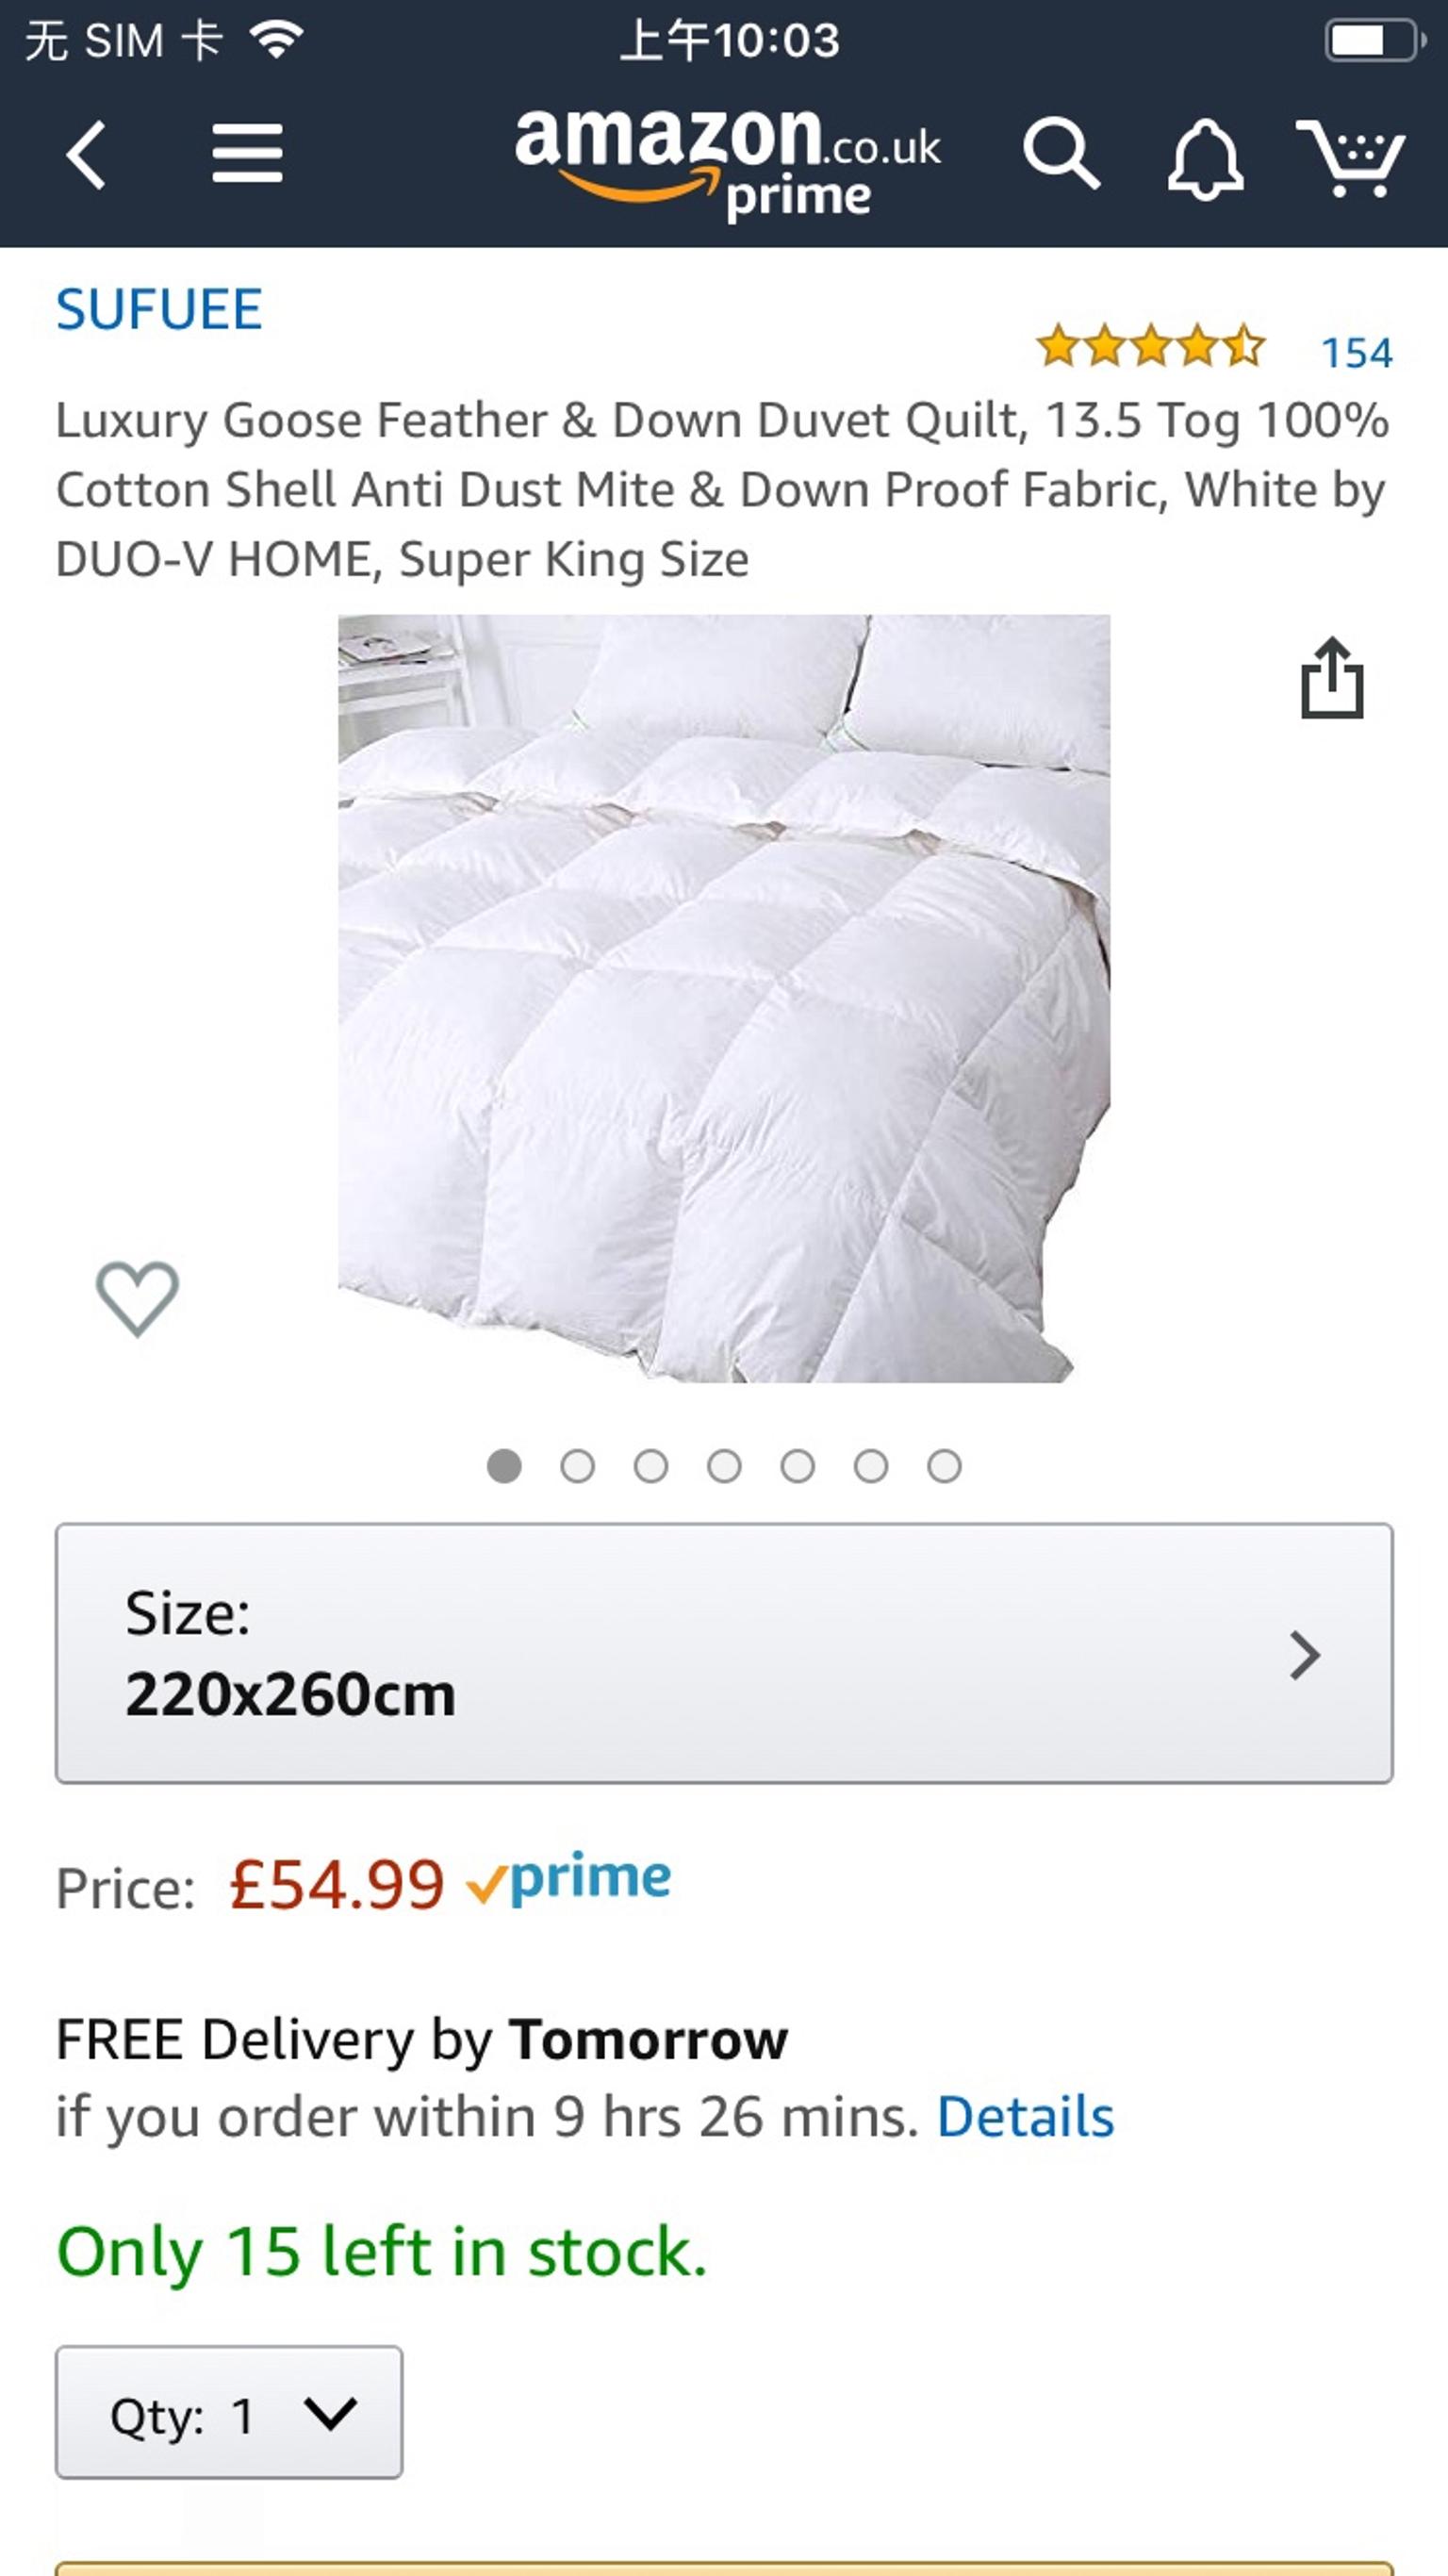 Brand New Goose Feather Down Duvet Quilt In Cv11 Nuneaton And